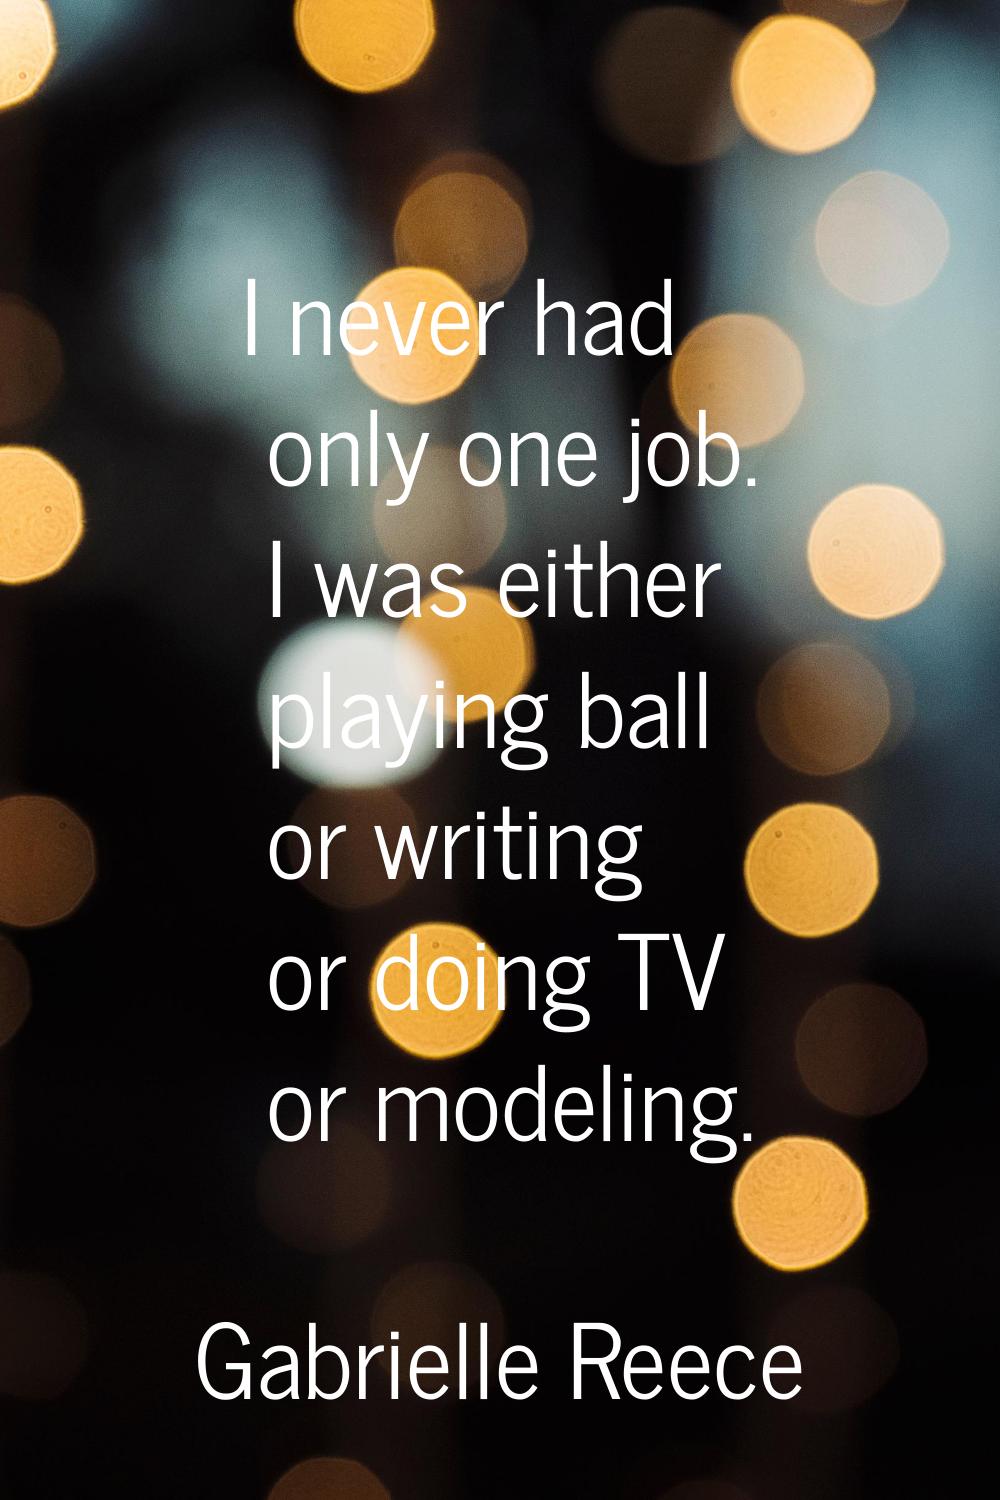 I never had only one job. I was either playing ball or writing or doing TV or modeling.